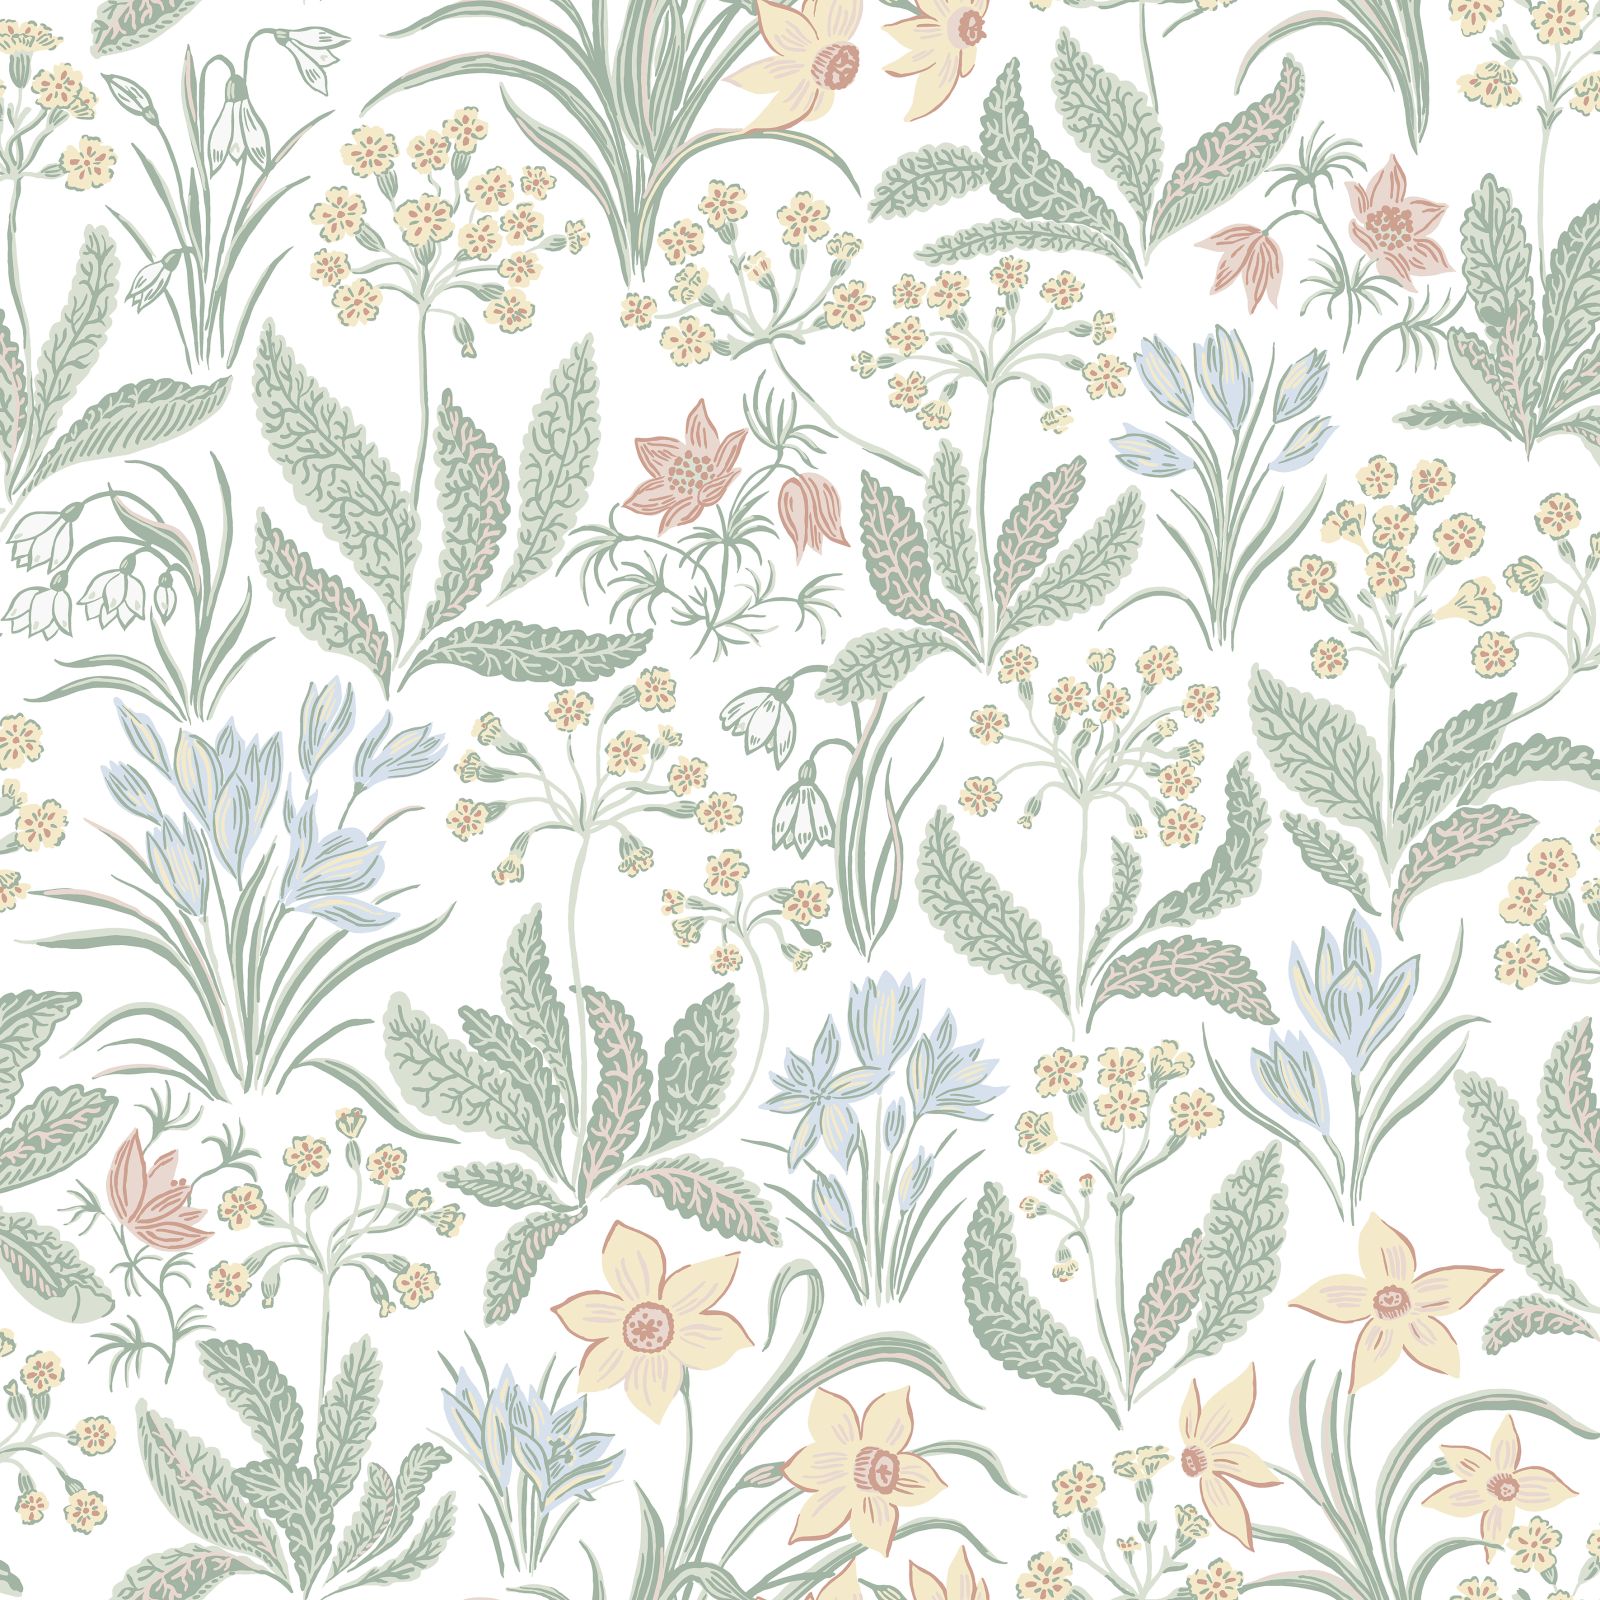 Huset wallpaper in a choice of 3 colourways